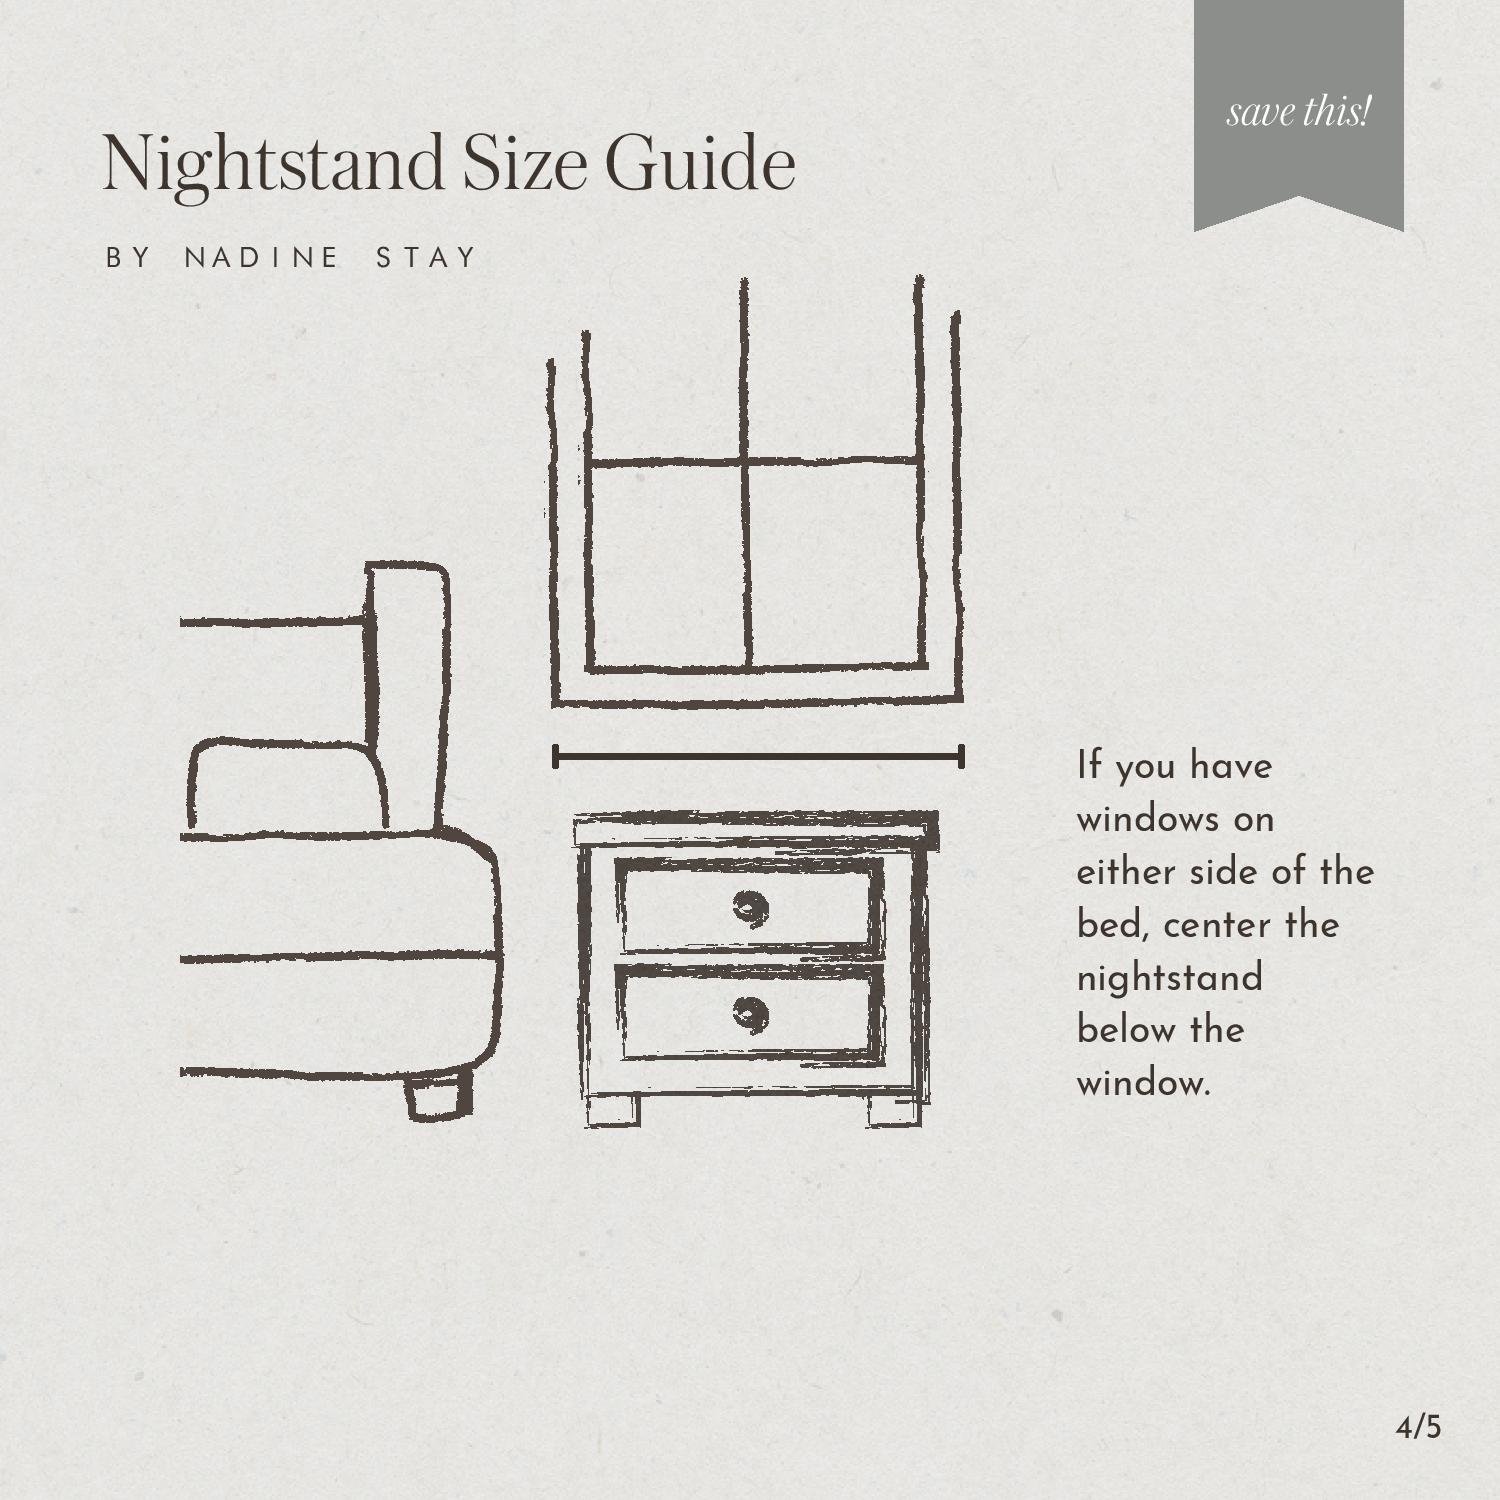 Nightstand Size & Placement Guide by Nadine Stay | What size nightstand you should get. Nightstand size guide. How to pick the right size nightstand. Nightstand width guide.